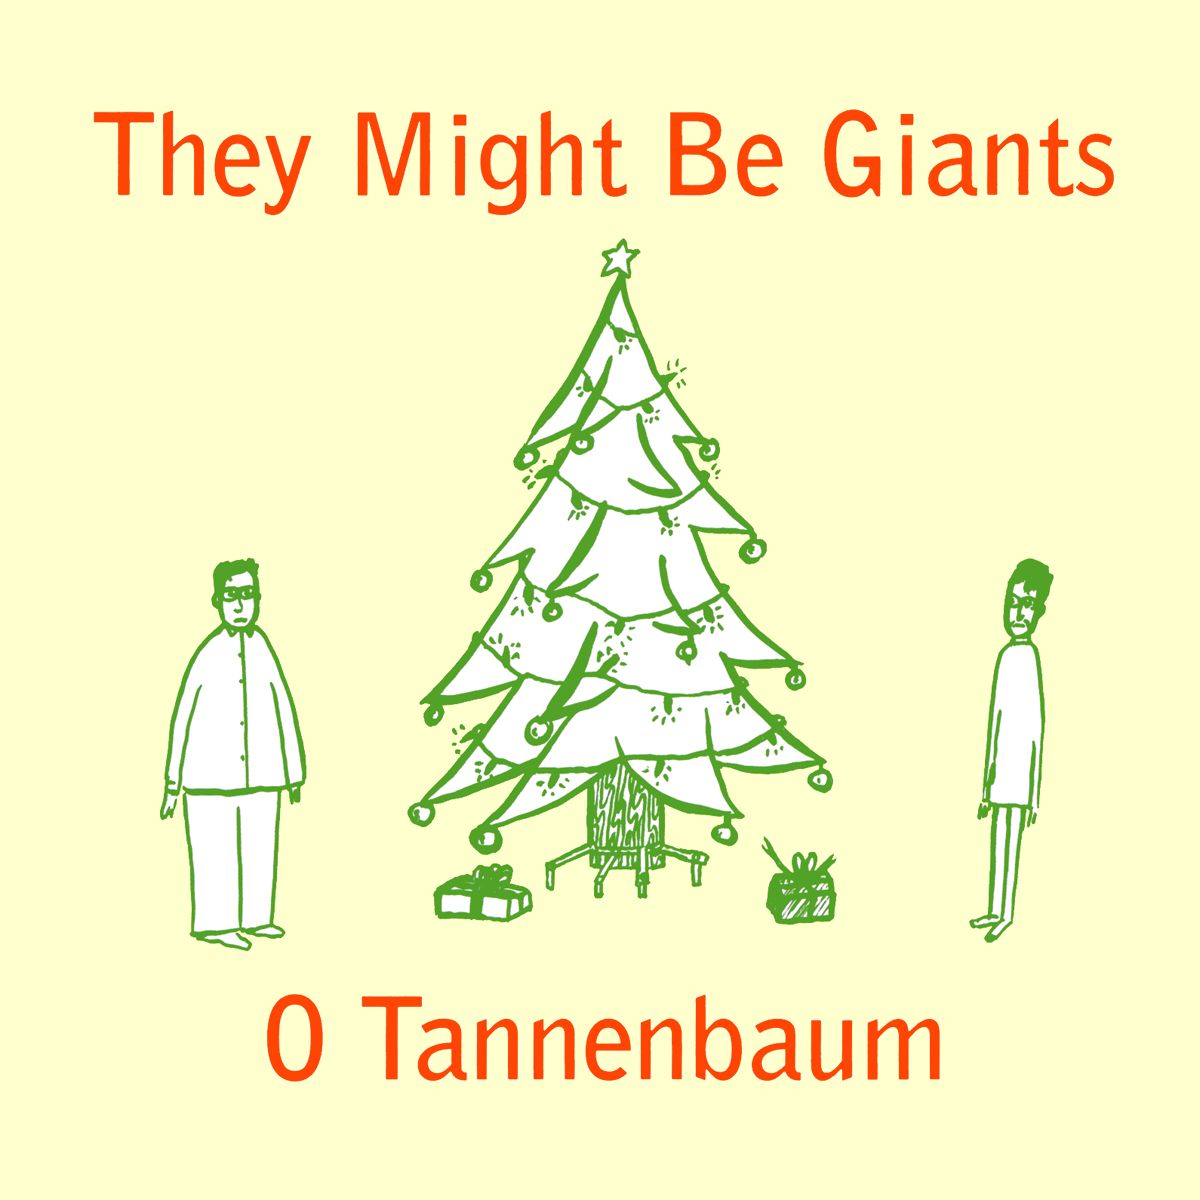 o tannenbaum they might be giants.